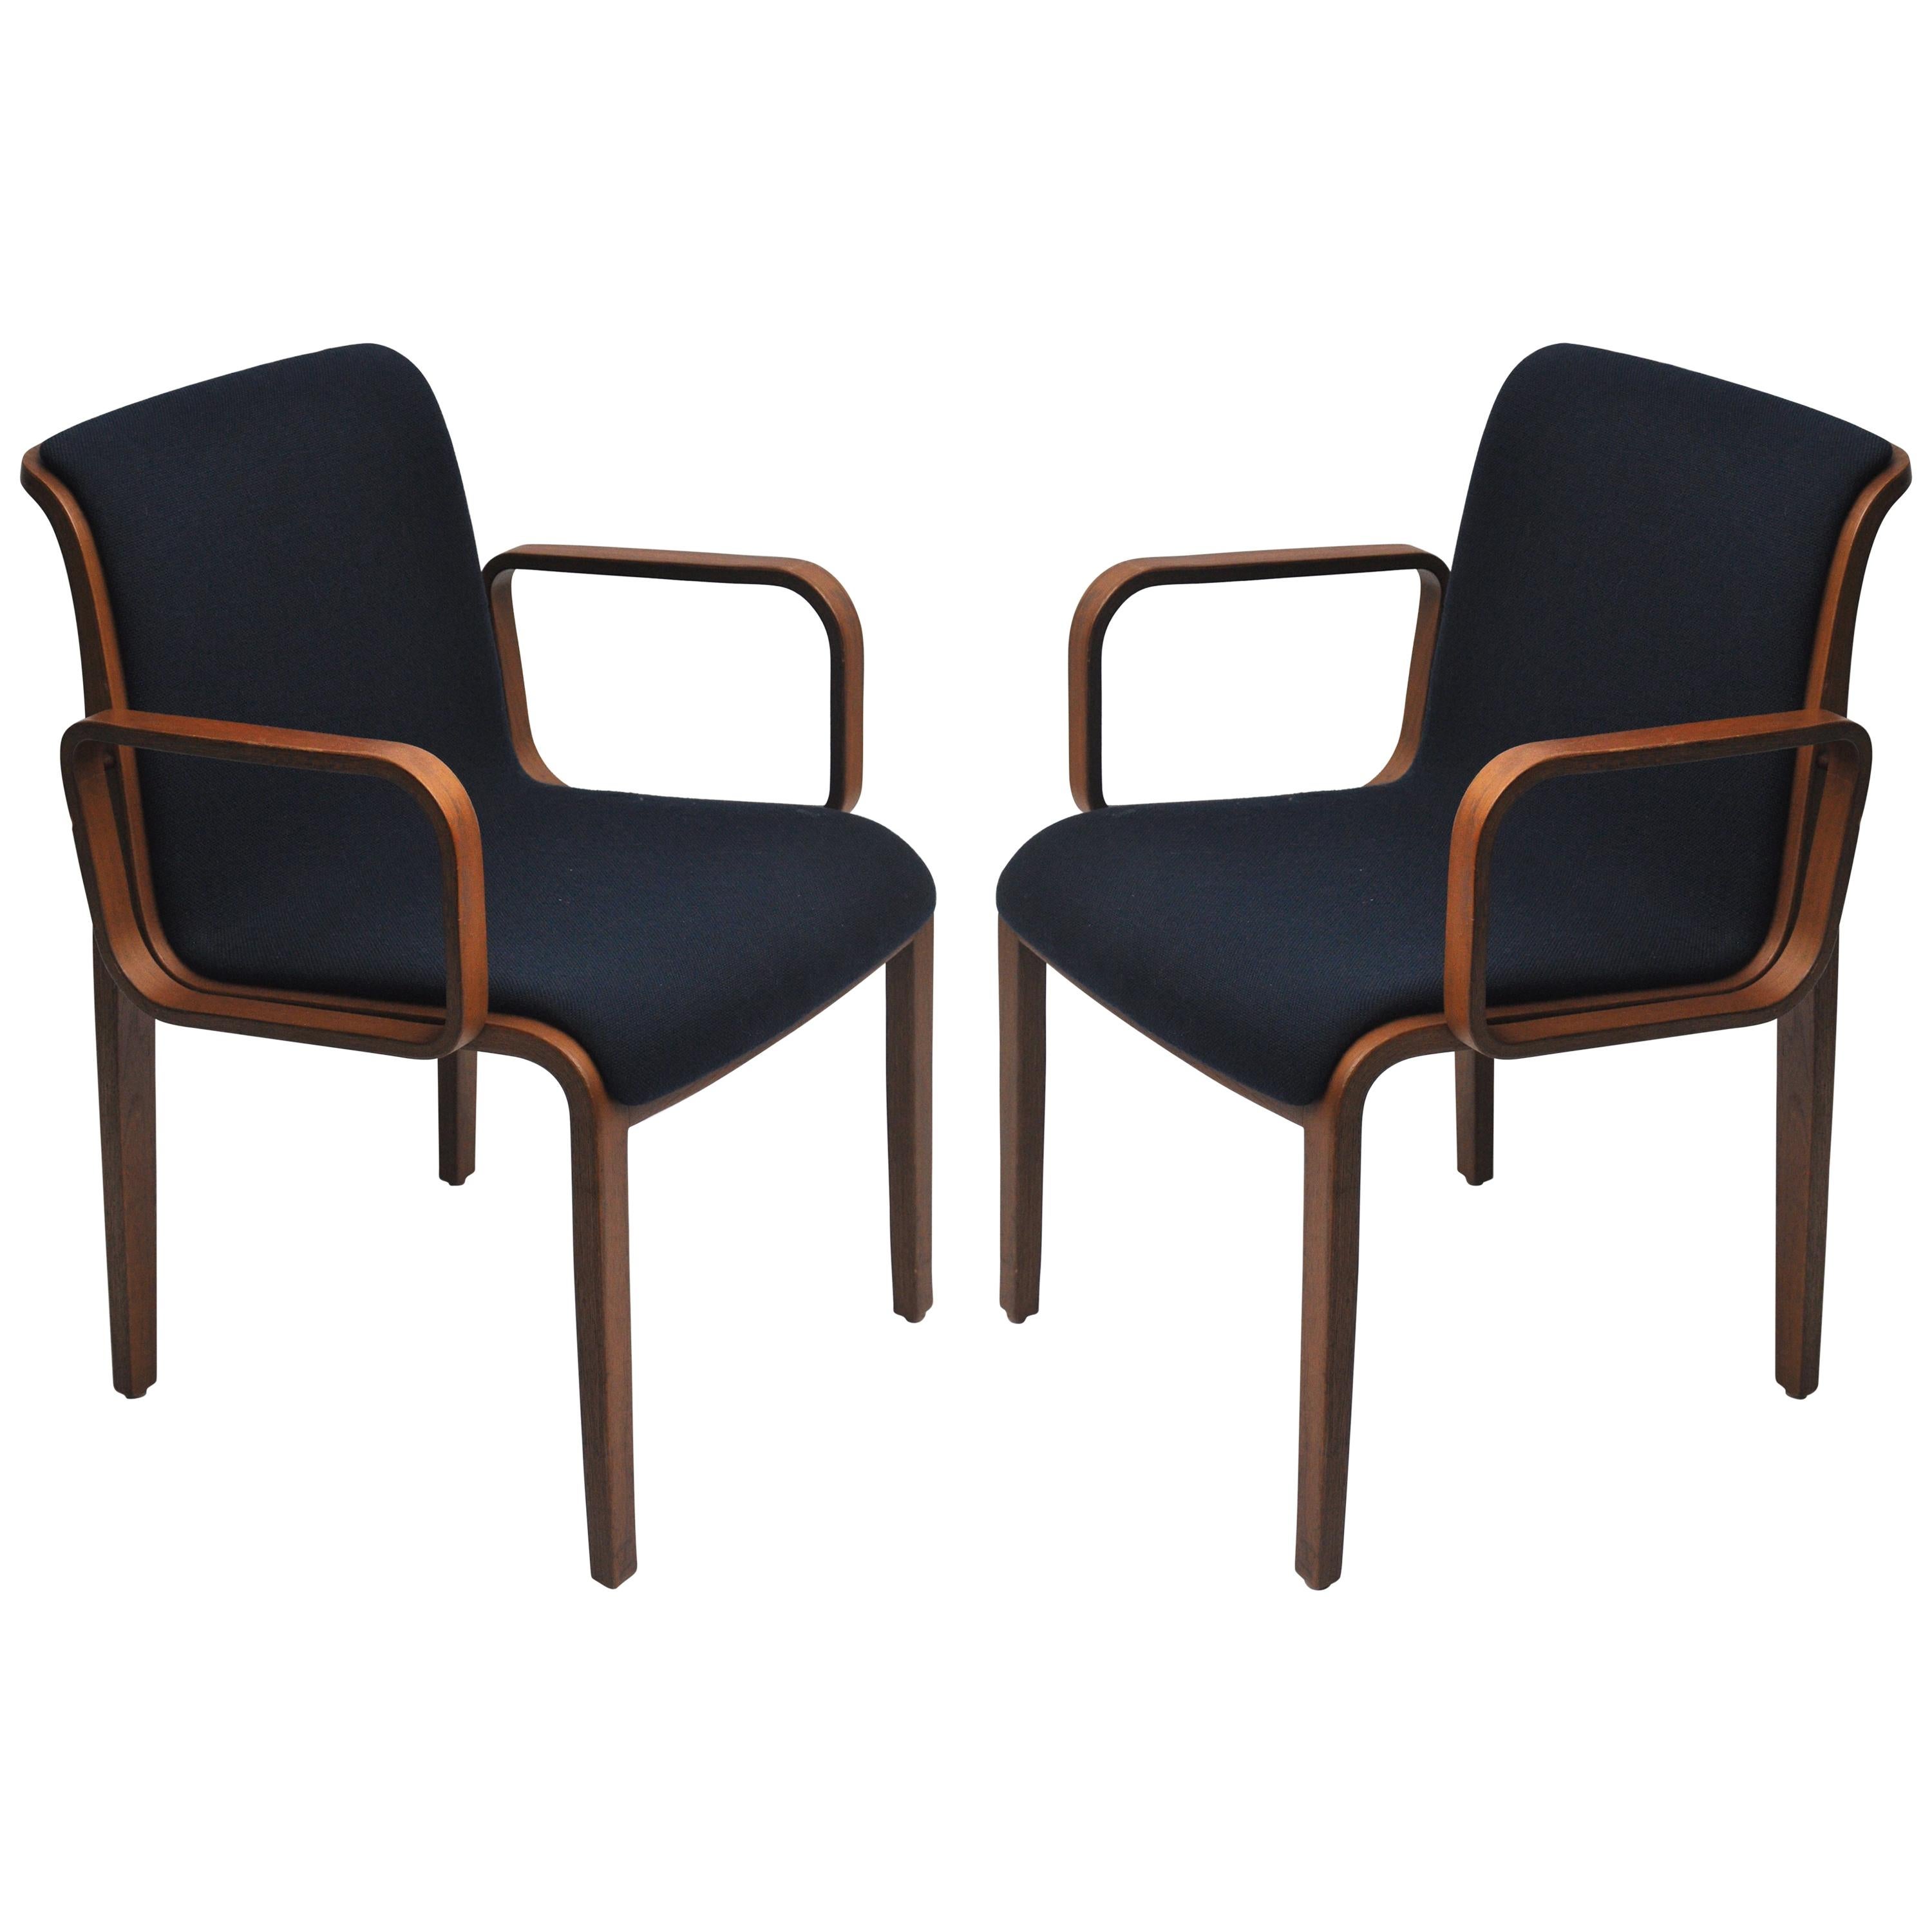 Mid-Century Modern Chair, Pair For Sale